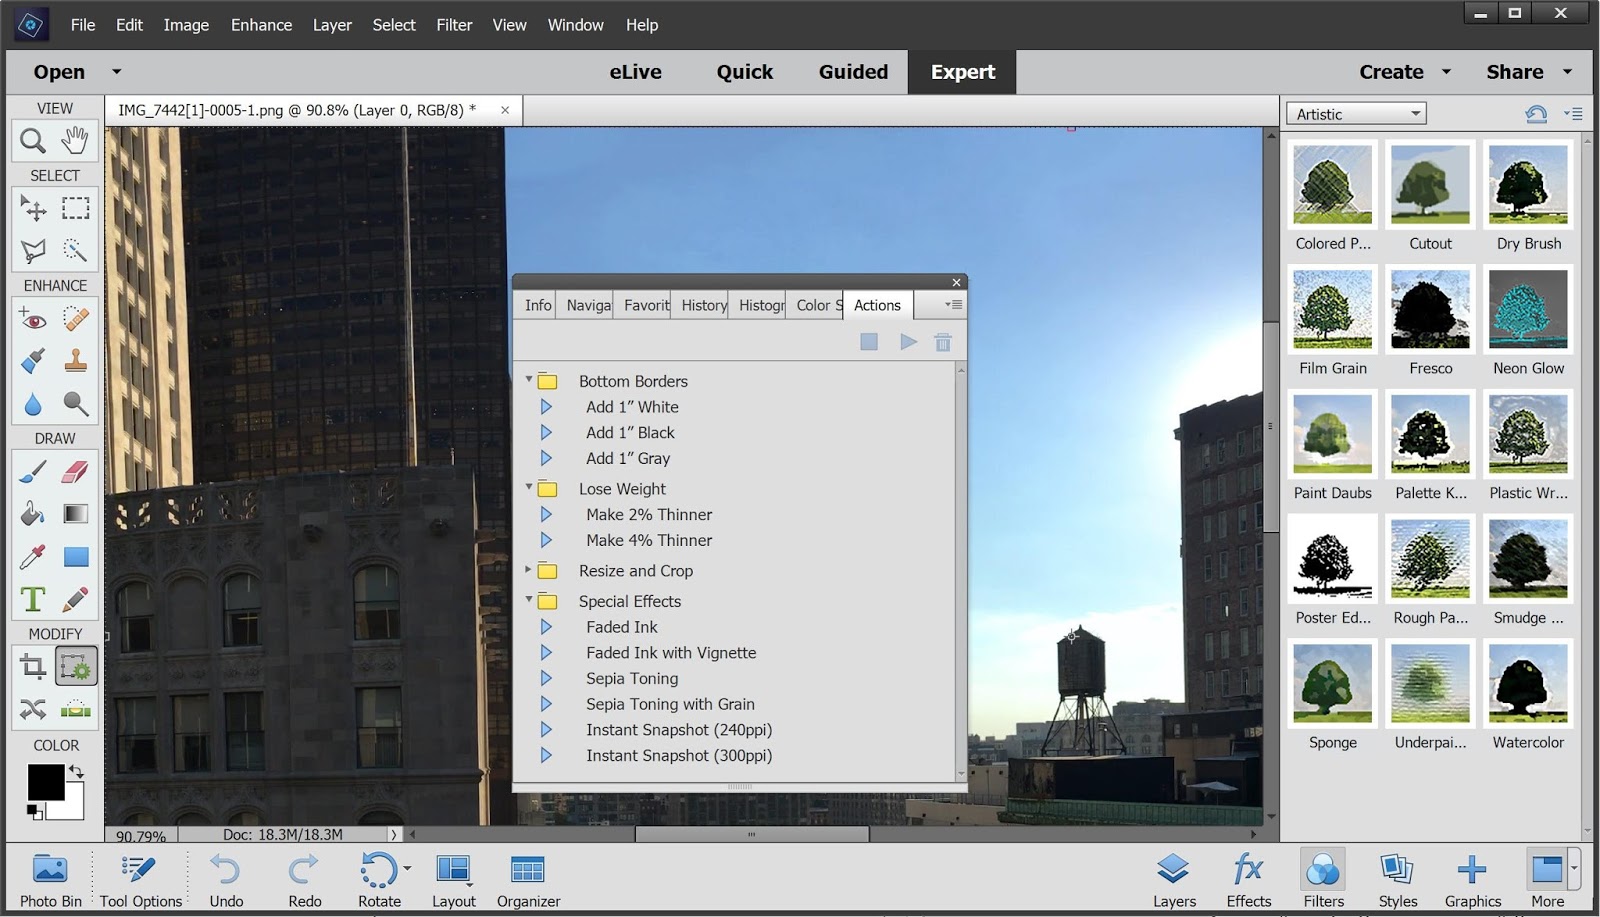 coolorus for mac free download